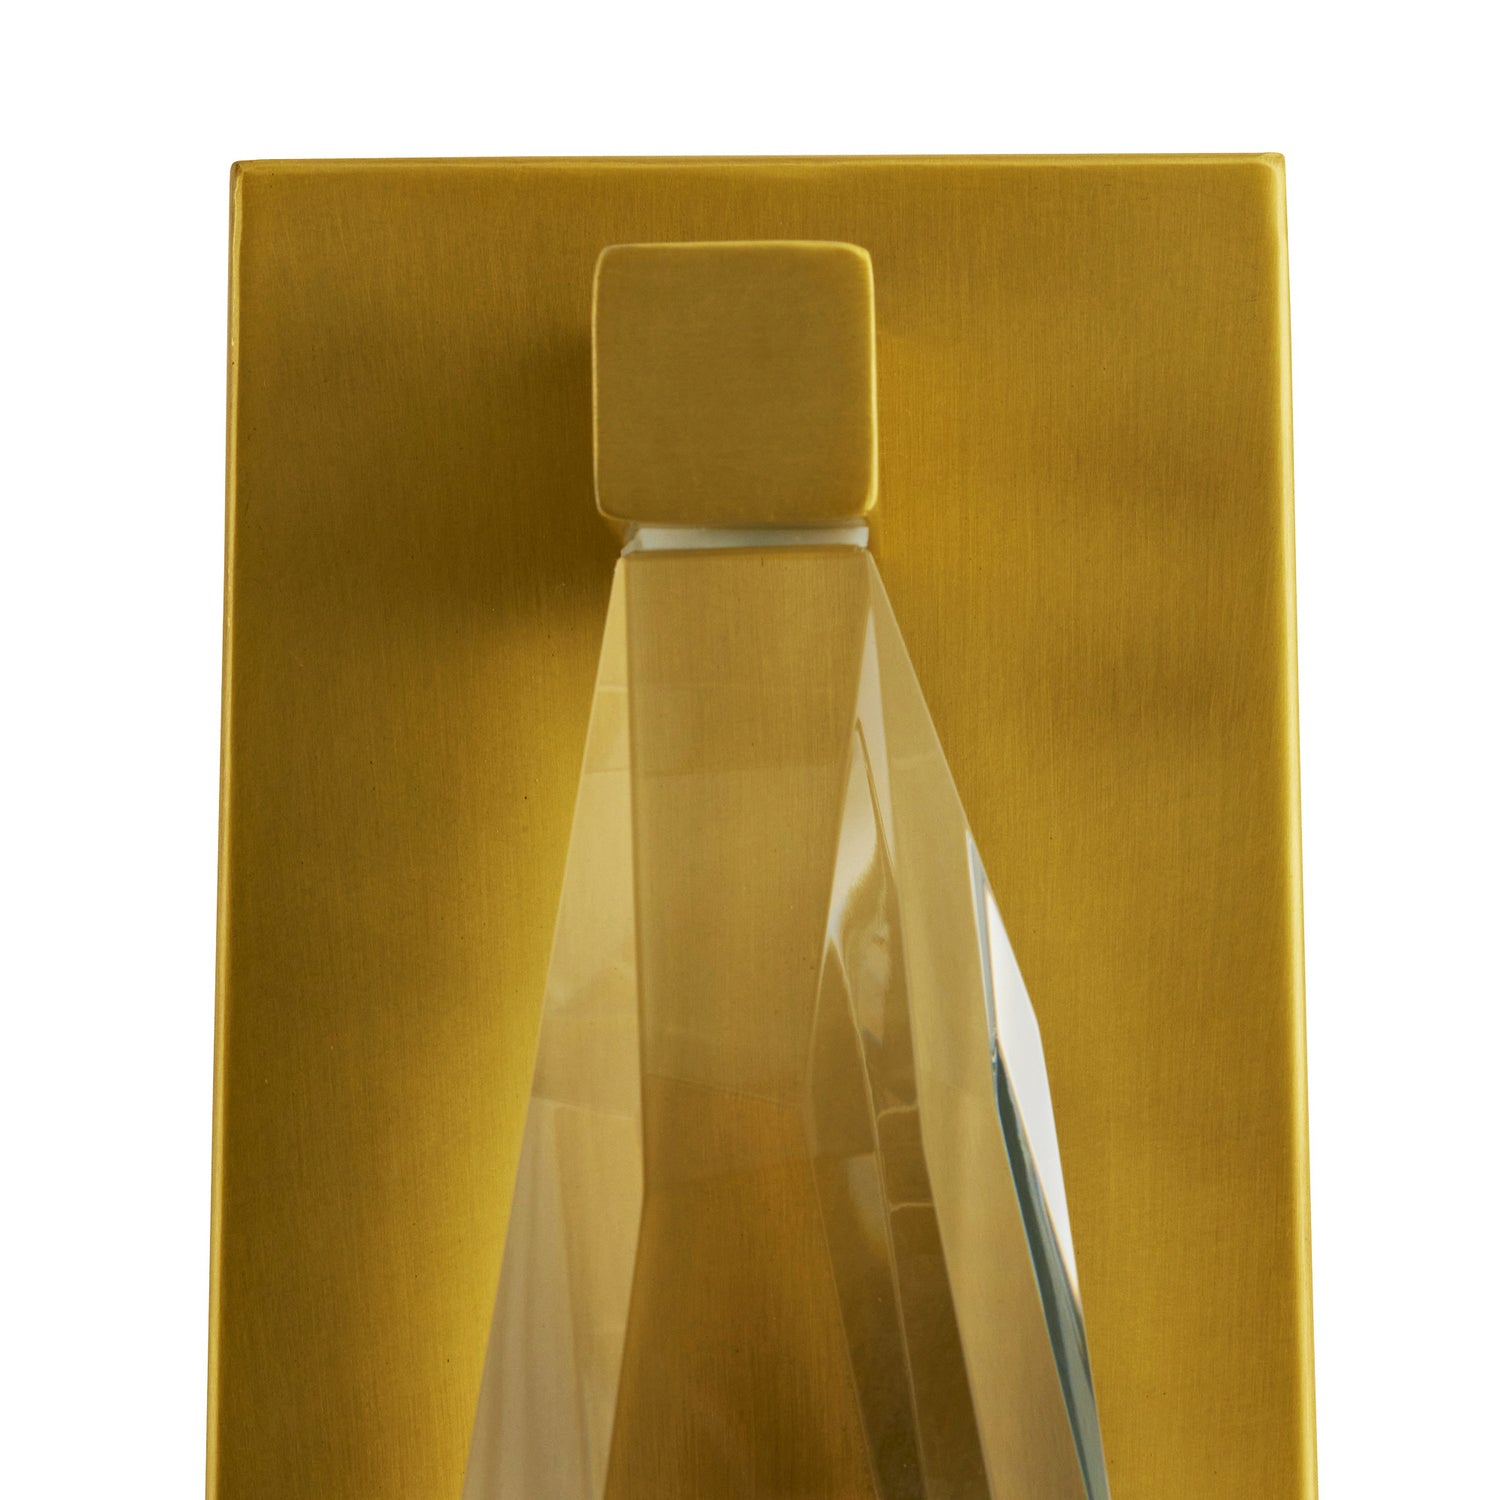 LED Wall Sconce from the Maisie collection in Antique Brass finish